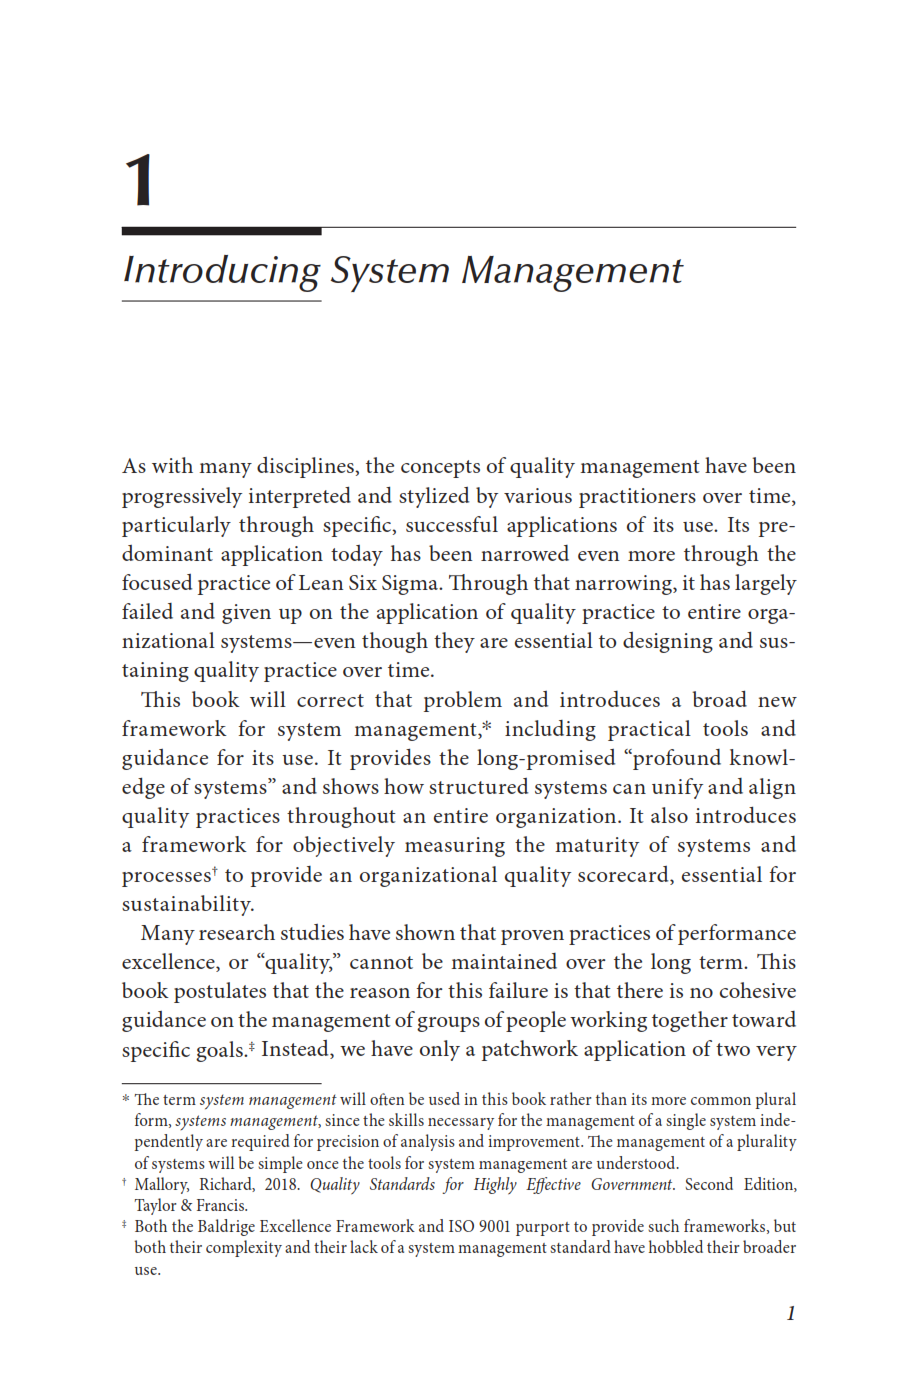 download free Lean System Management for Leaders A New Performance Management Toolset by Richard E. Mallory eBook in pdf format